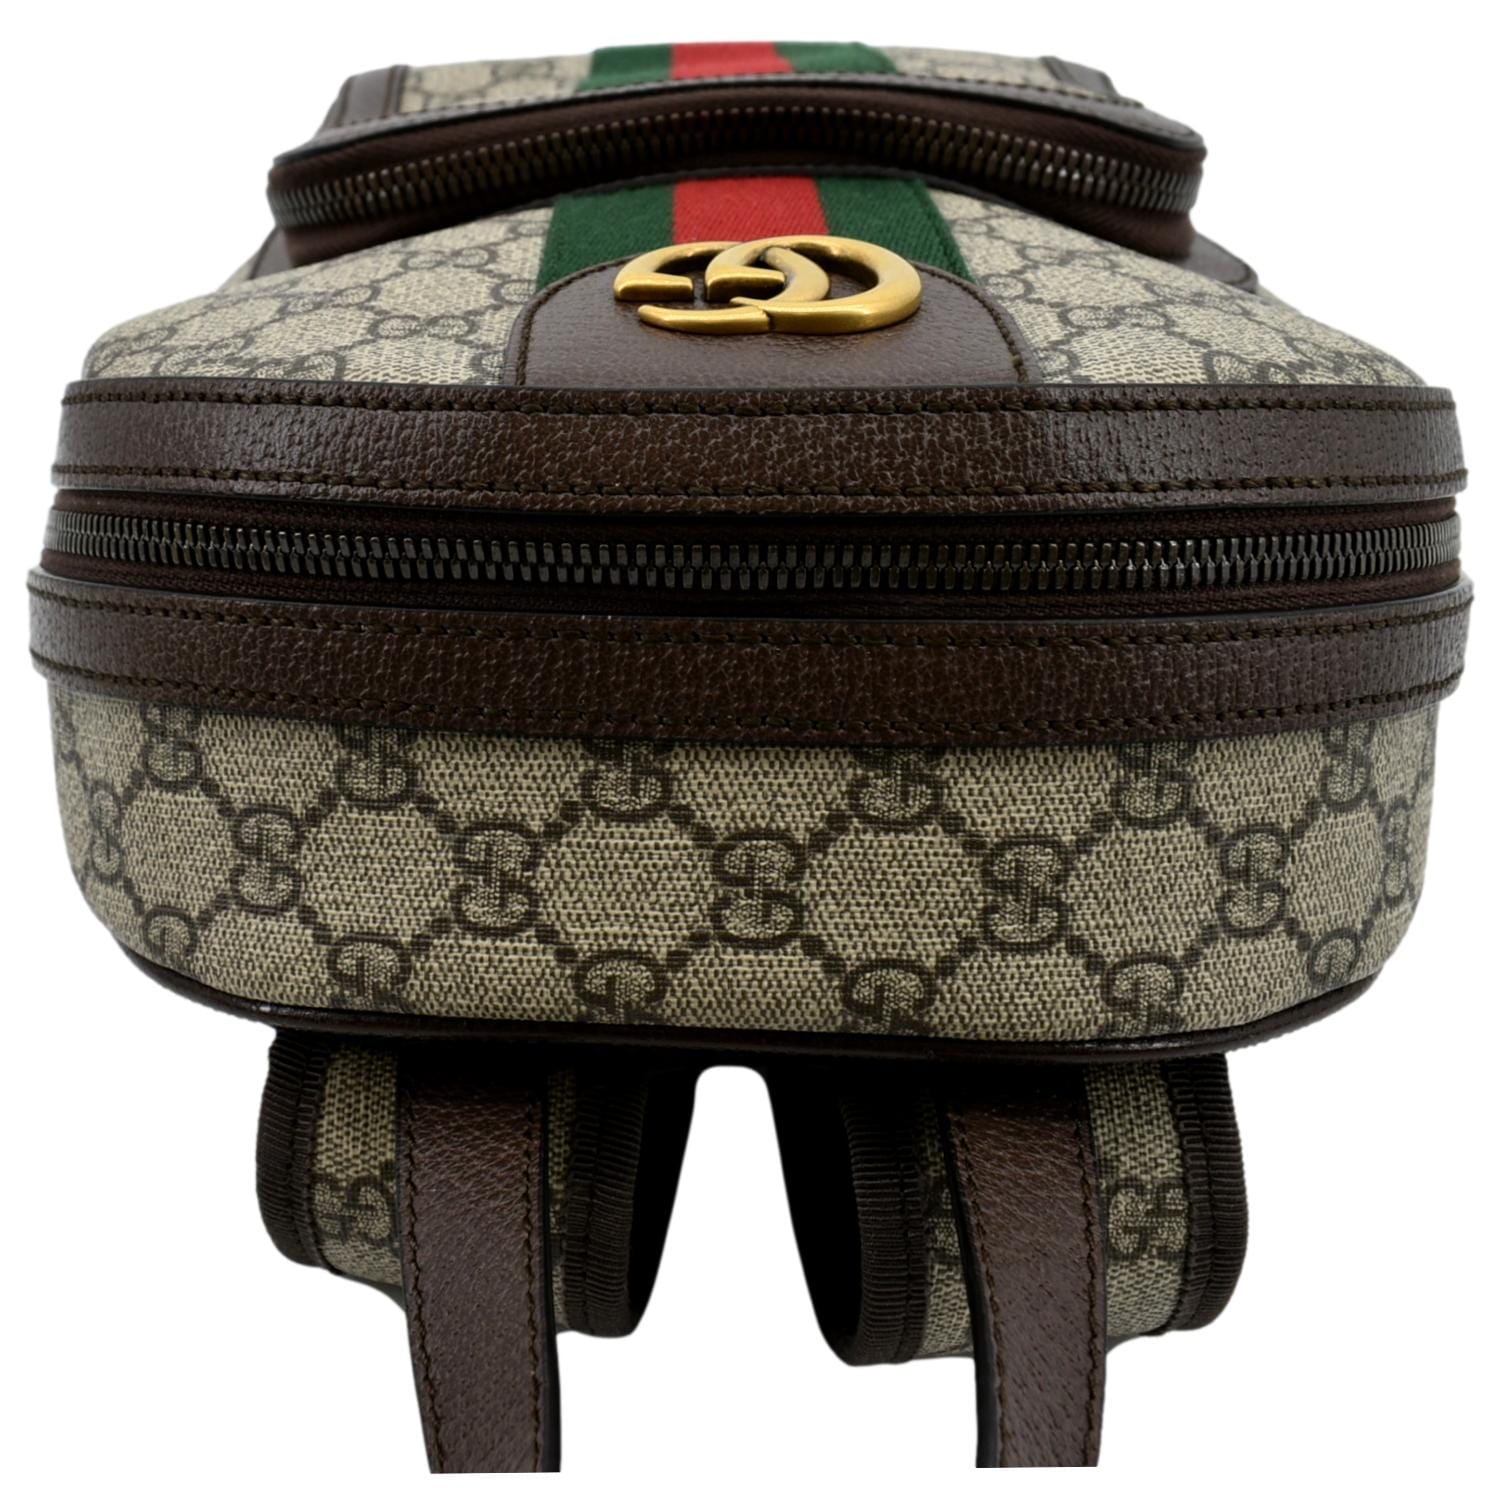 Ophidia Small GG Supreme Shoulder Bag in Beige - Gucci